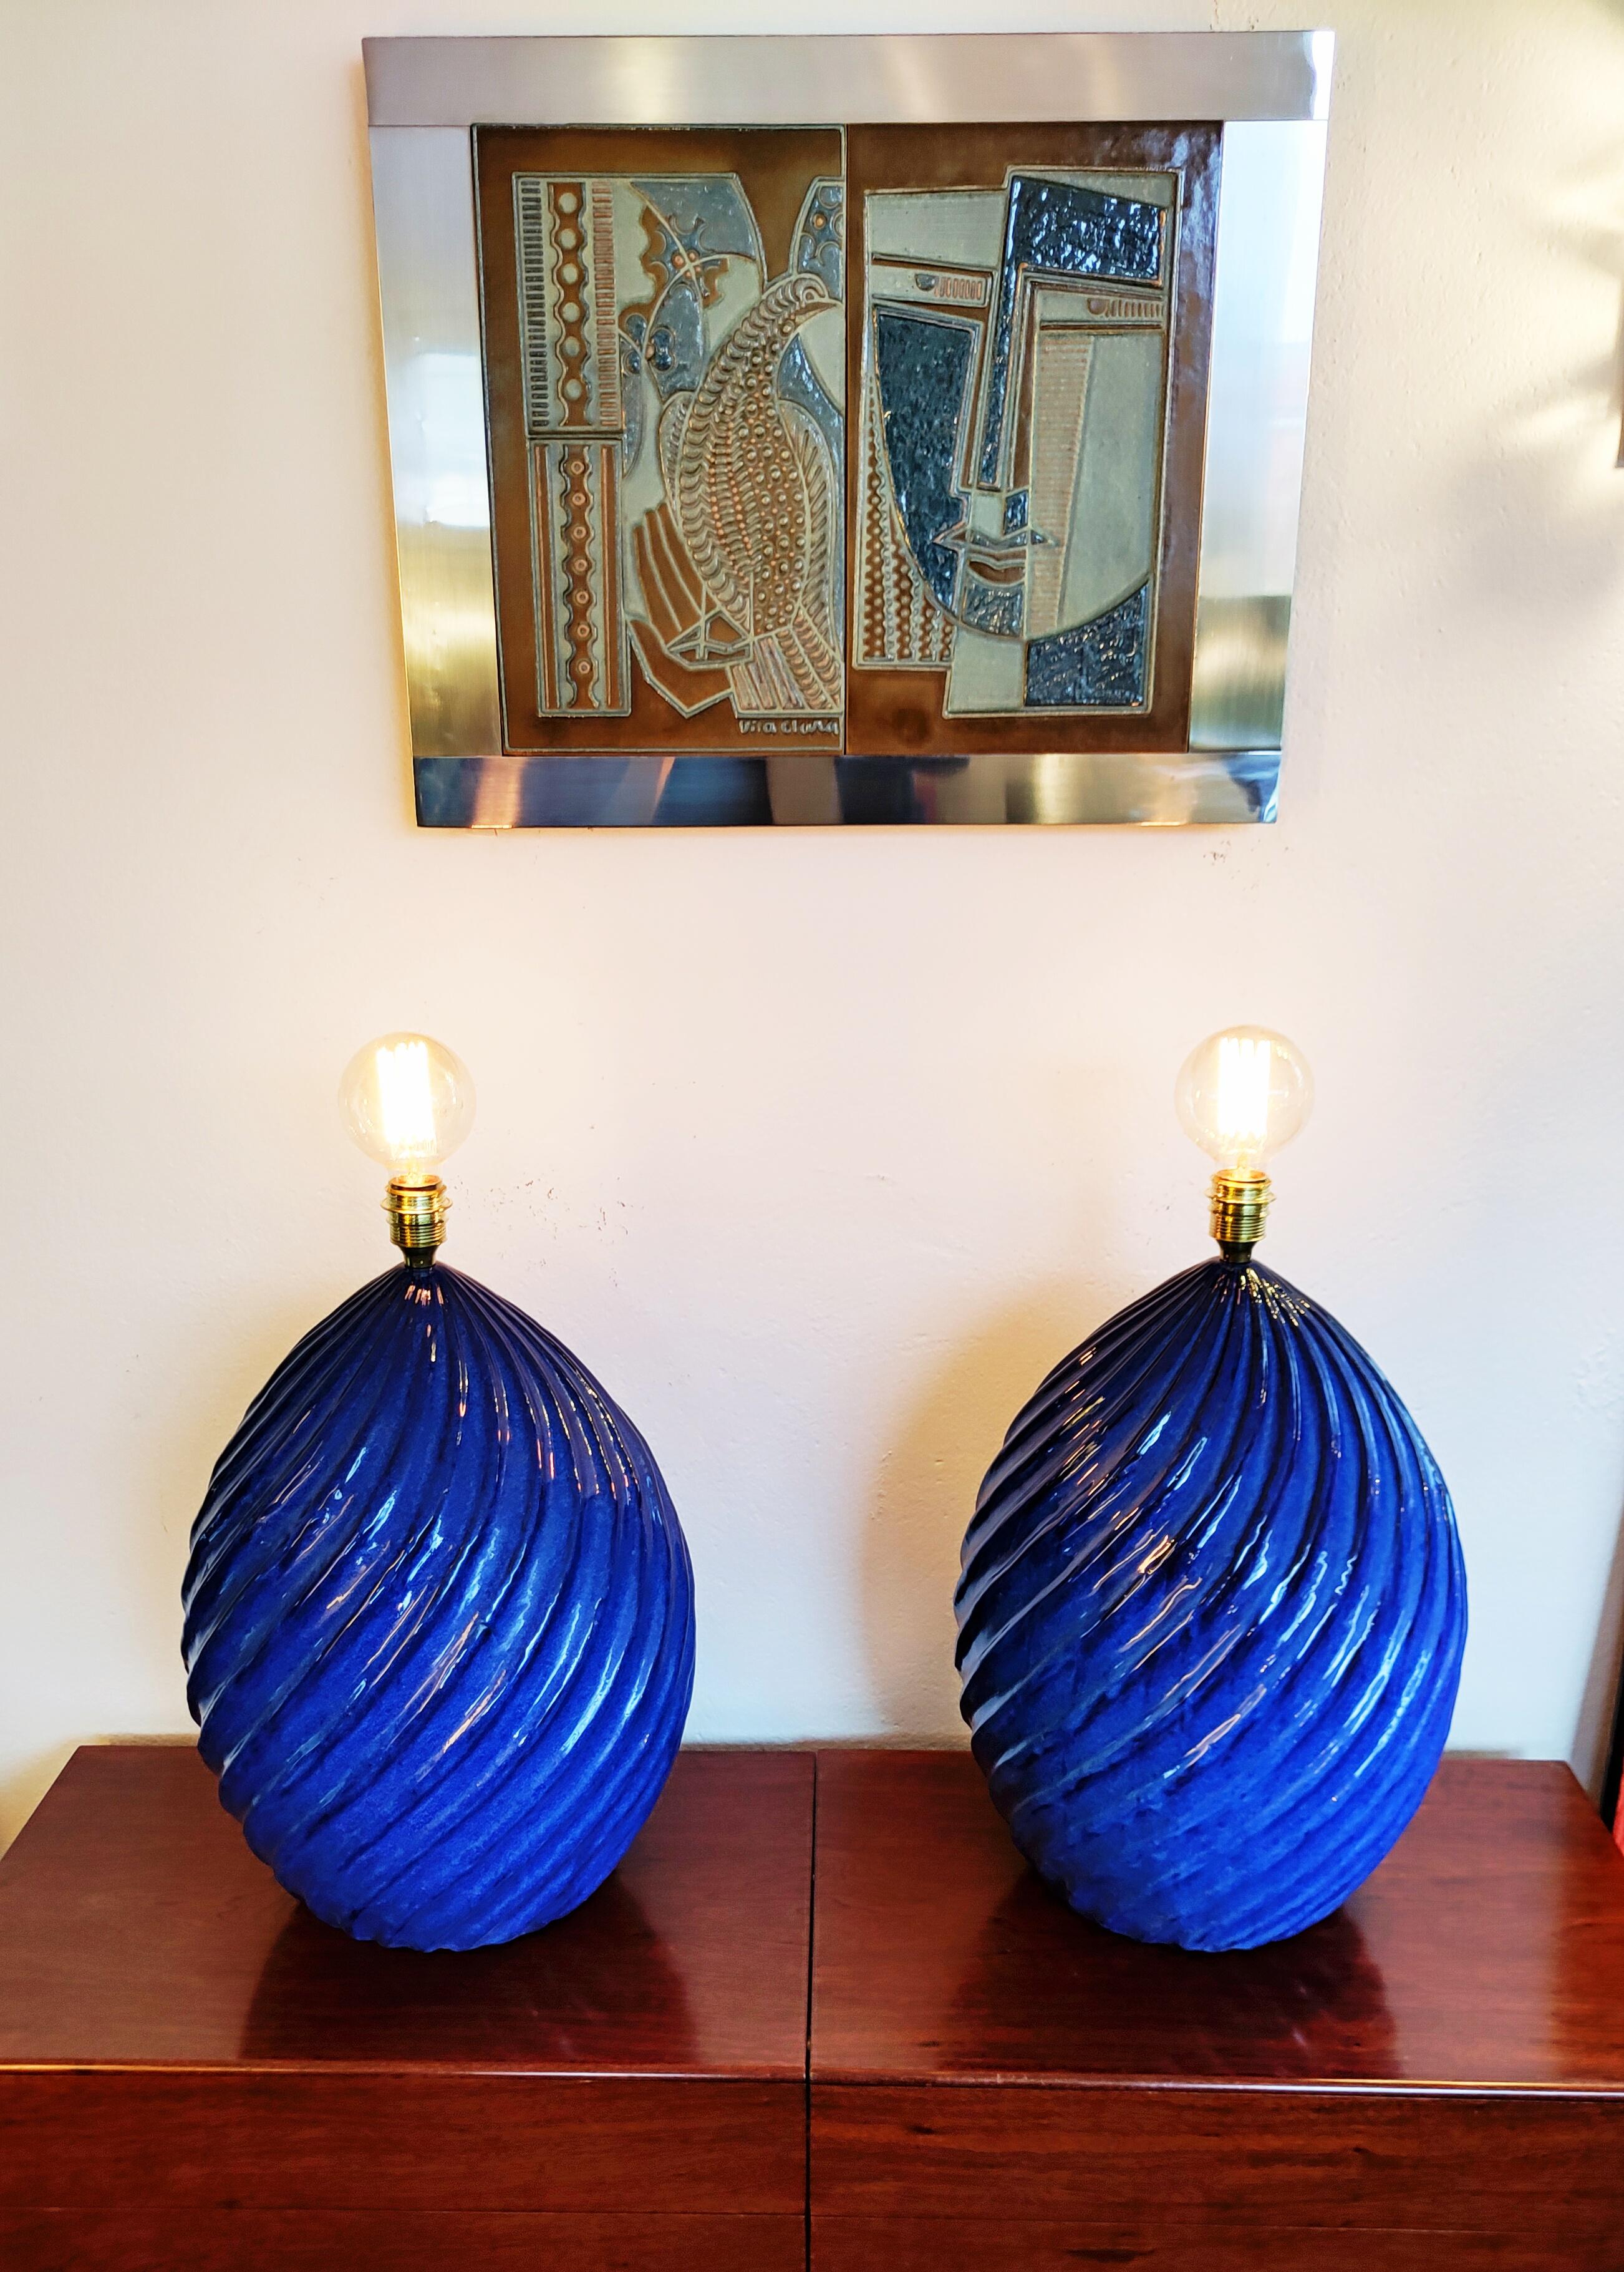 Rare and beautiful pair of very large ceramic table lamp manufactured in Spain in 1970s. Very beautiful deep indigo blue. These ceramics are all signed by the artist at the base. Two pairs available.